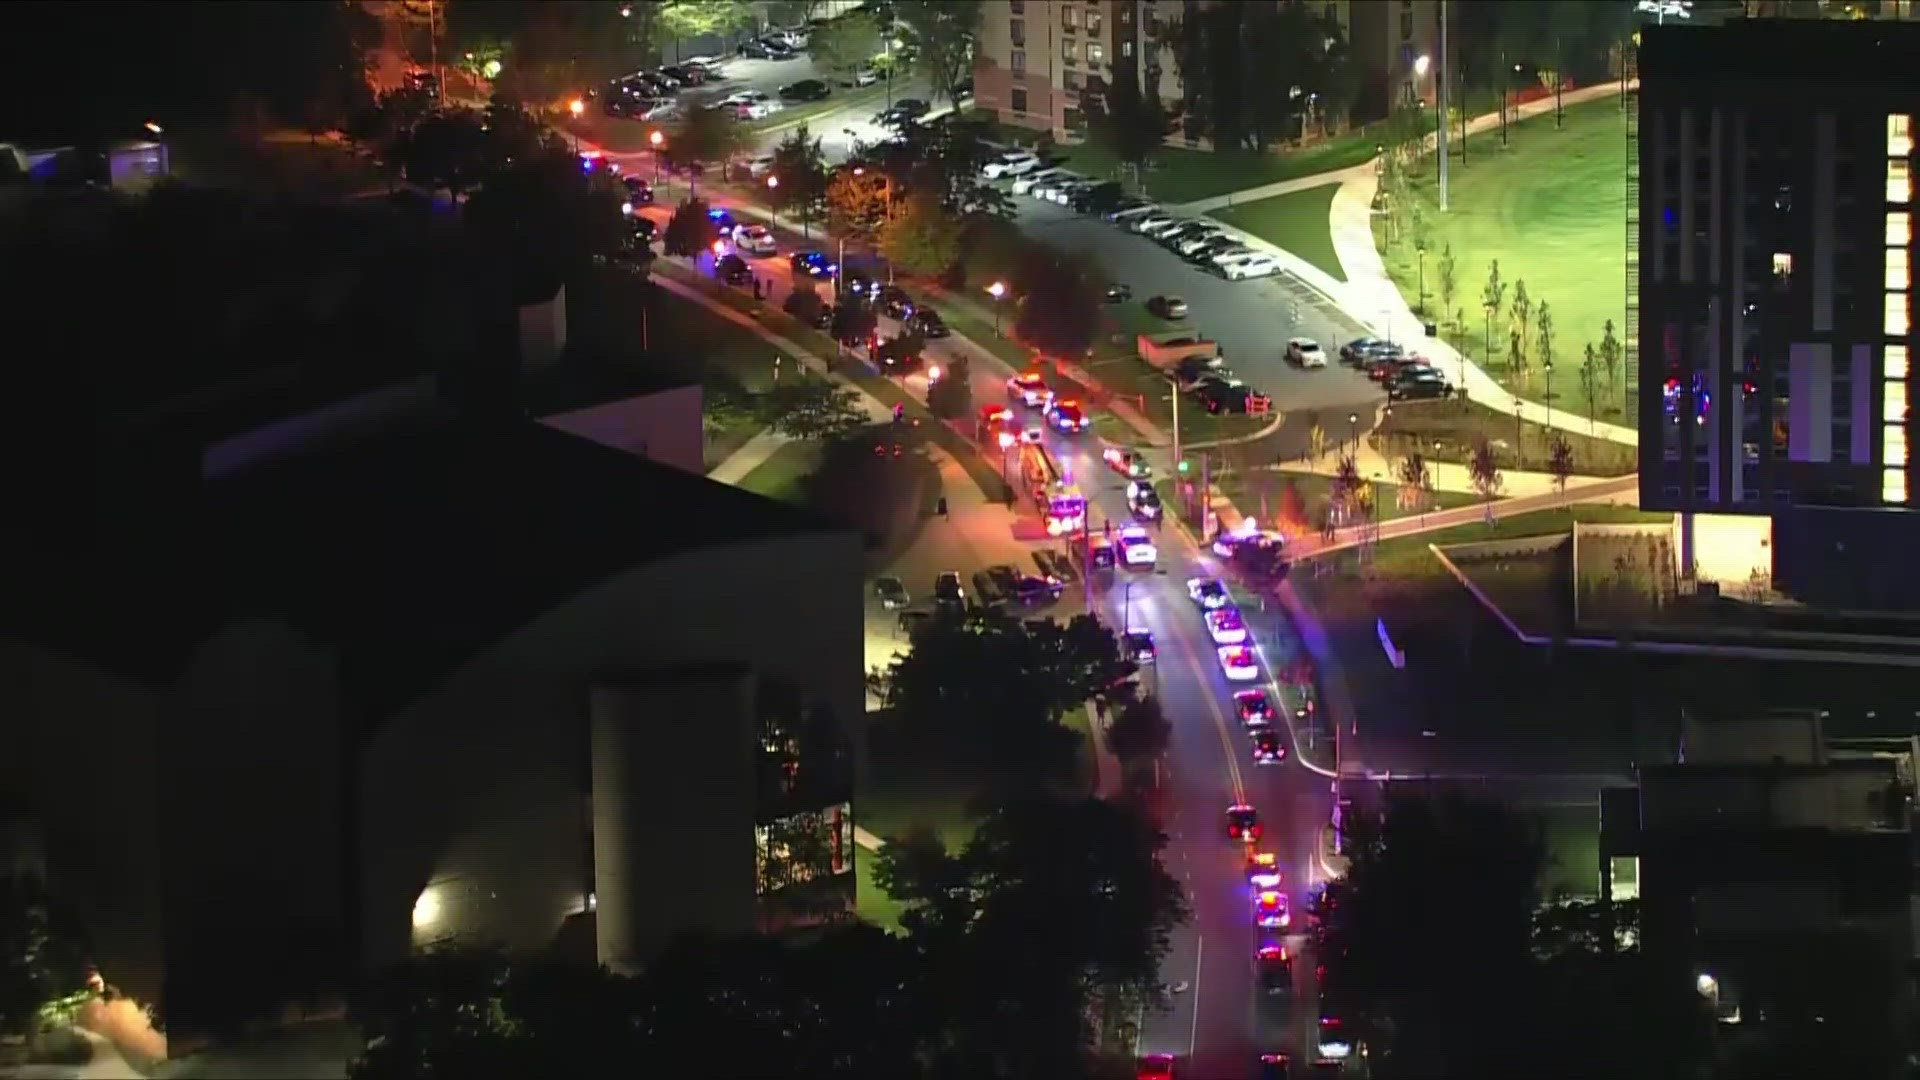 There is a reported active shooter with multiple victims at Morgan State University in Baltimore, Maryland on Tuesday evening.